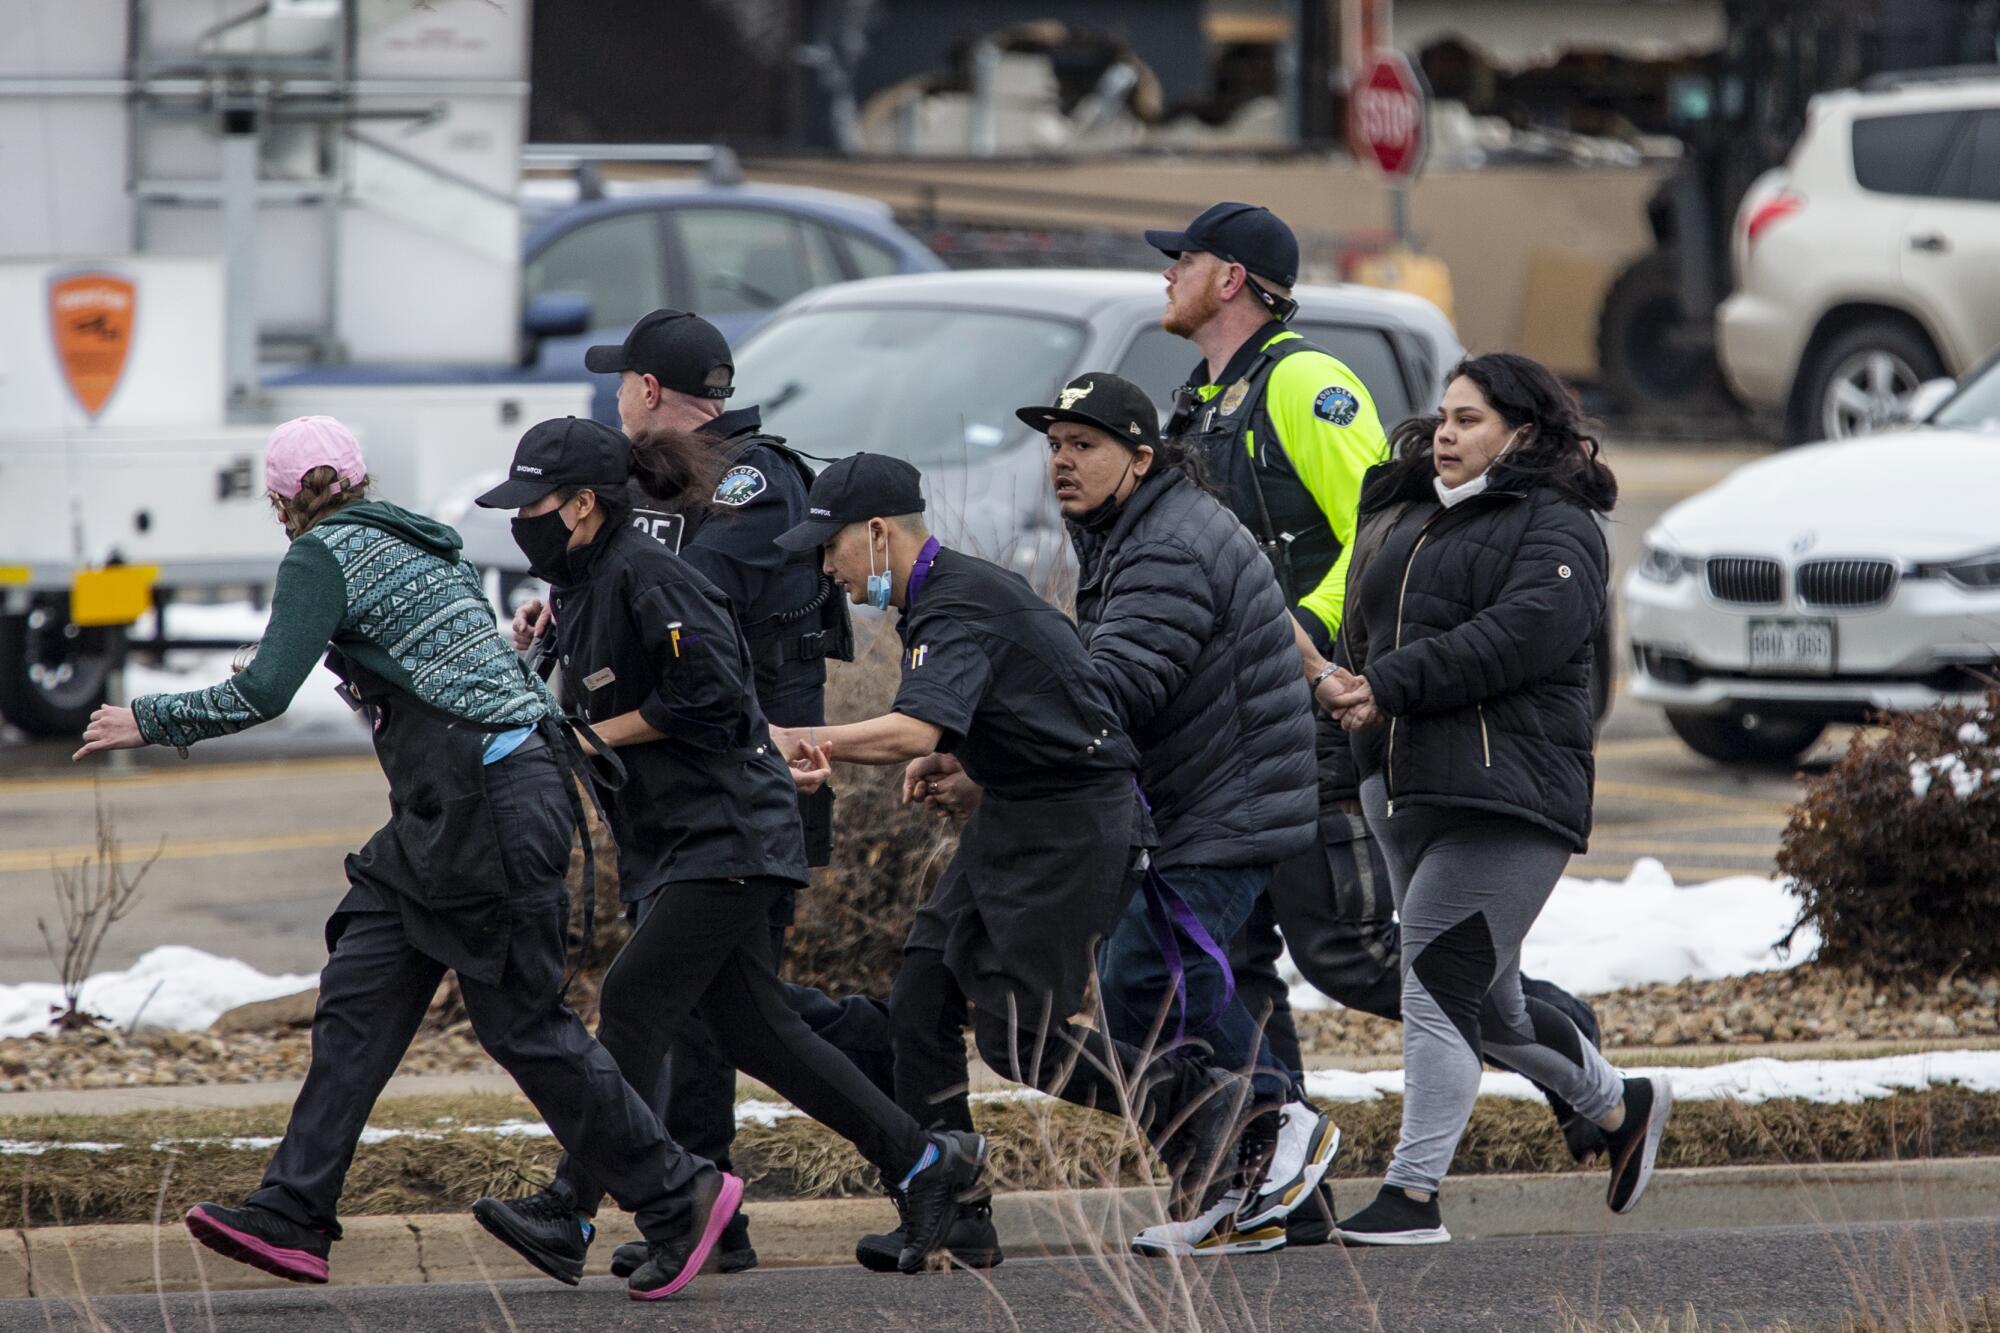 Shoppers are evacuated from a King Soopers grocery store after a gunman opened fire Monday in Boulder, Colo.